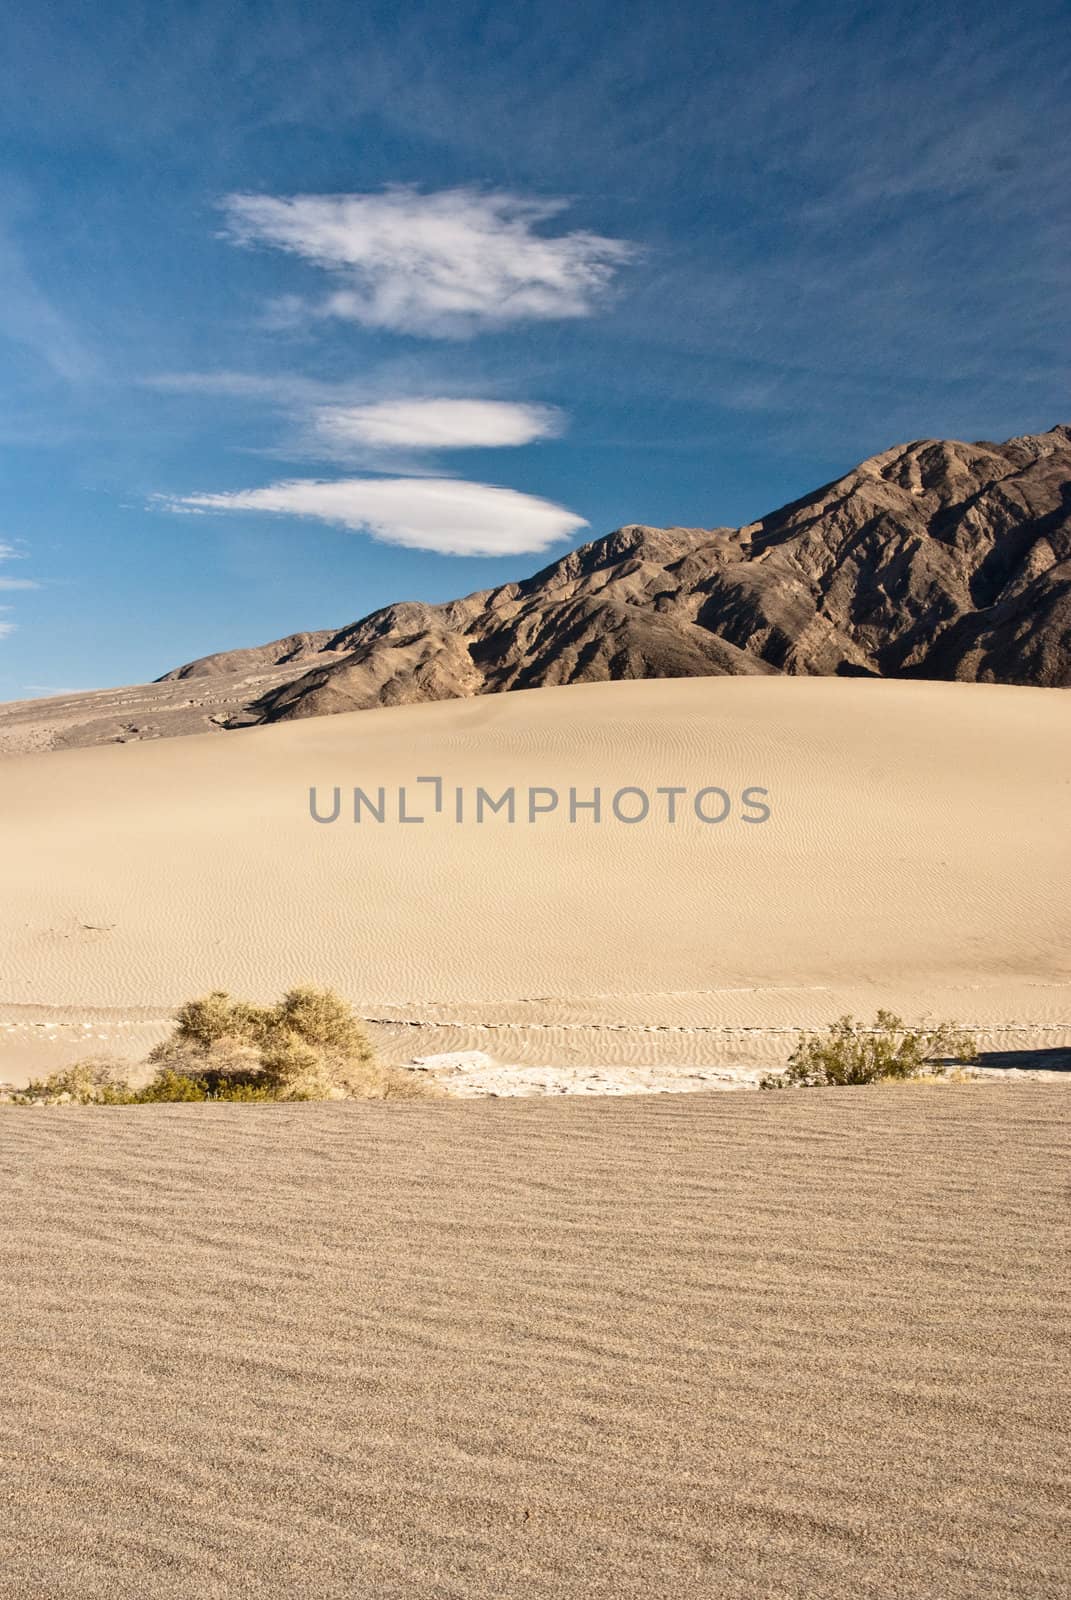 Stovepipe Wells, Death Valley by emattil